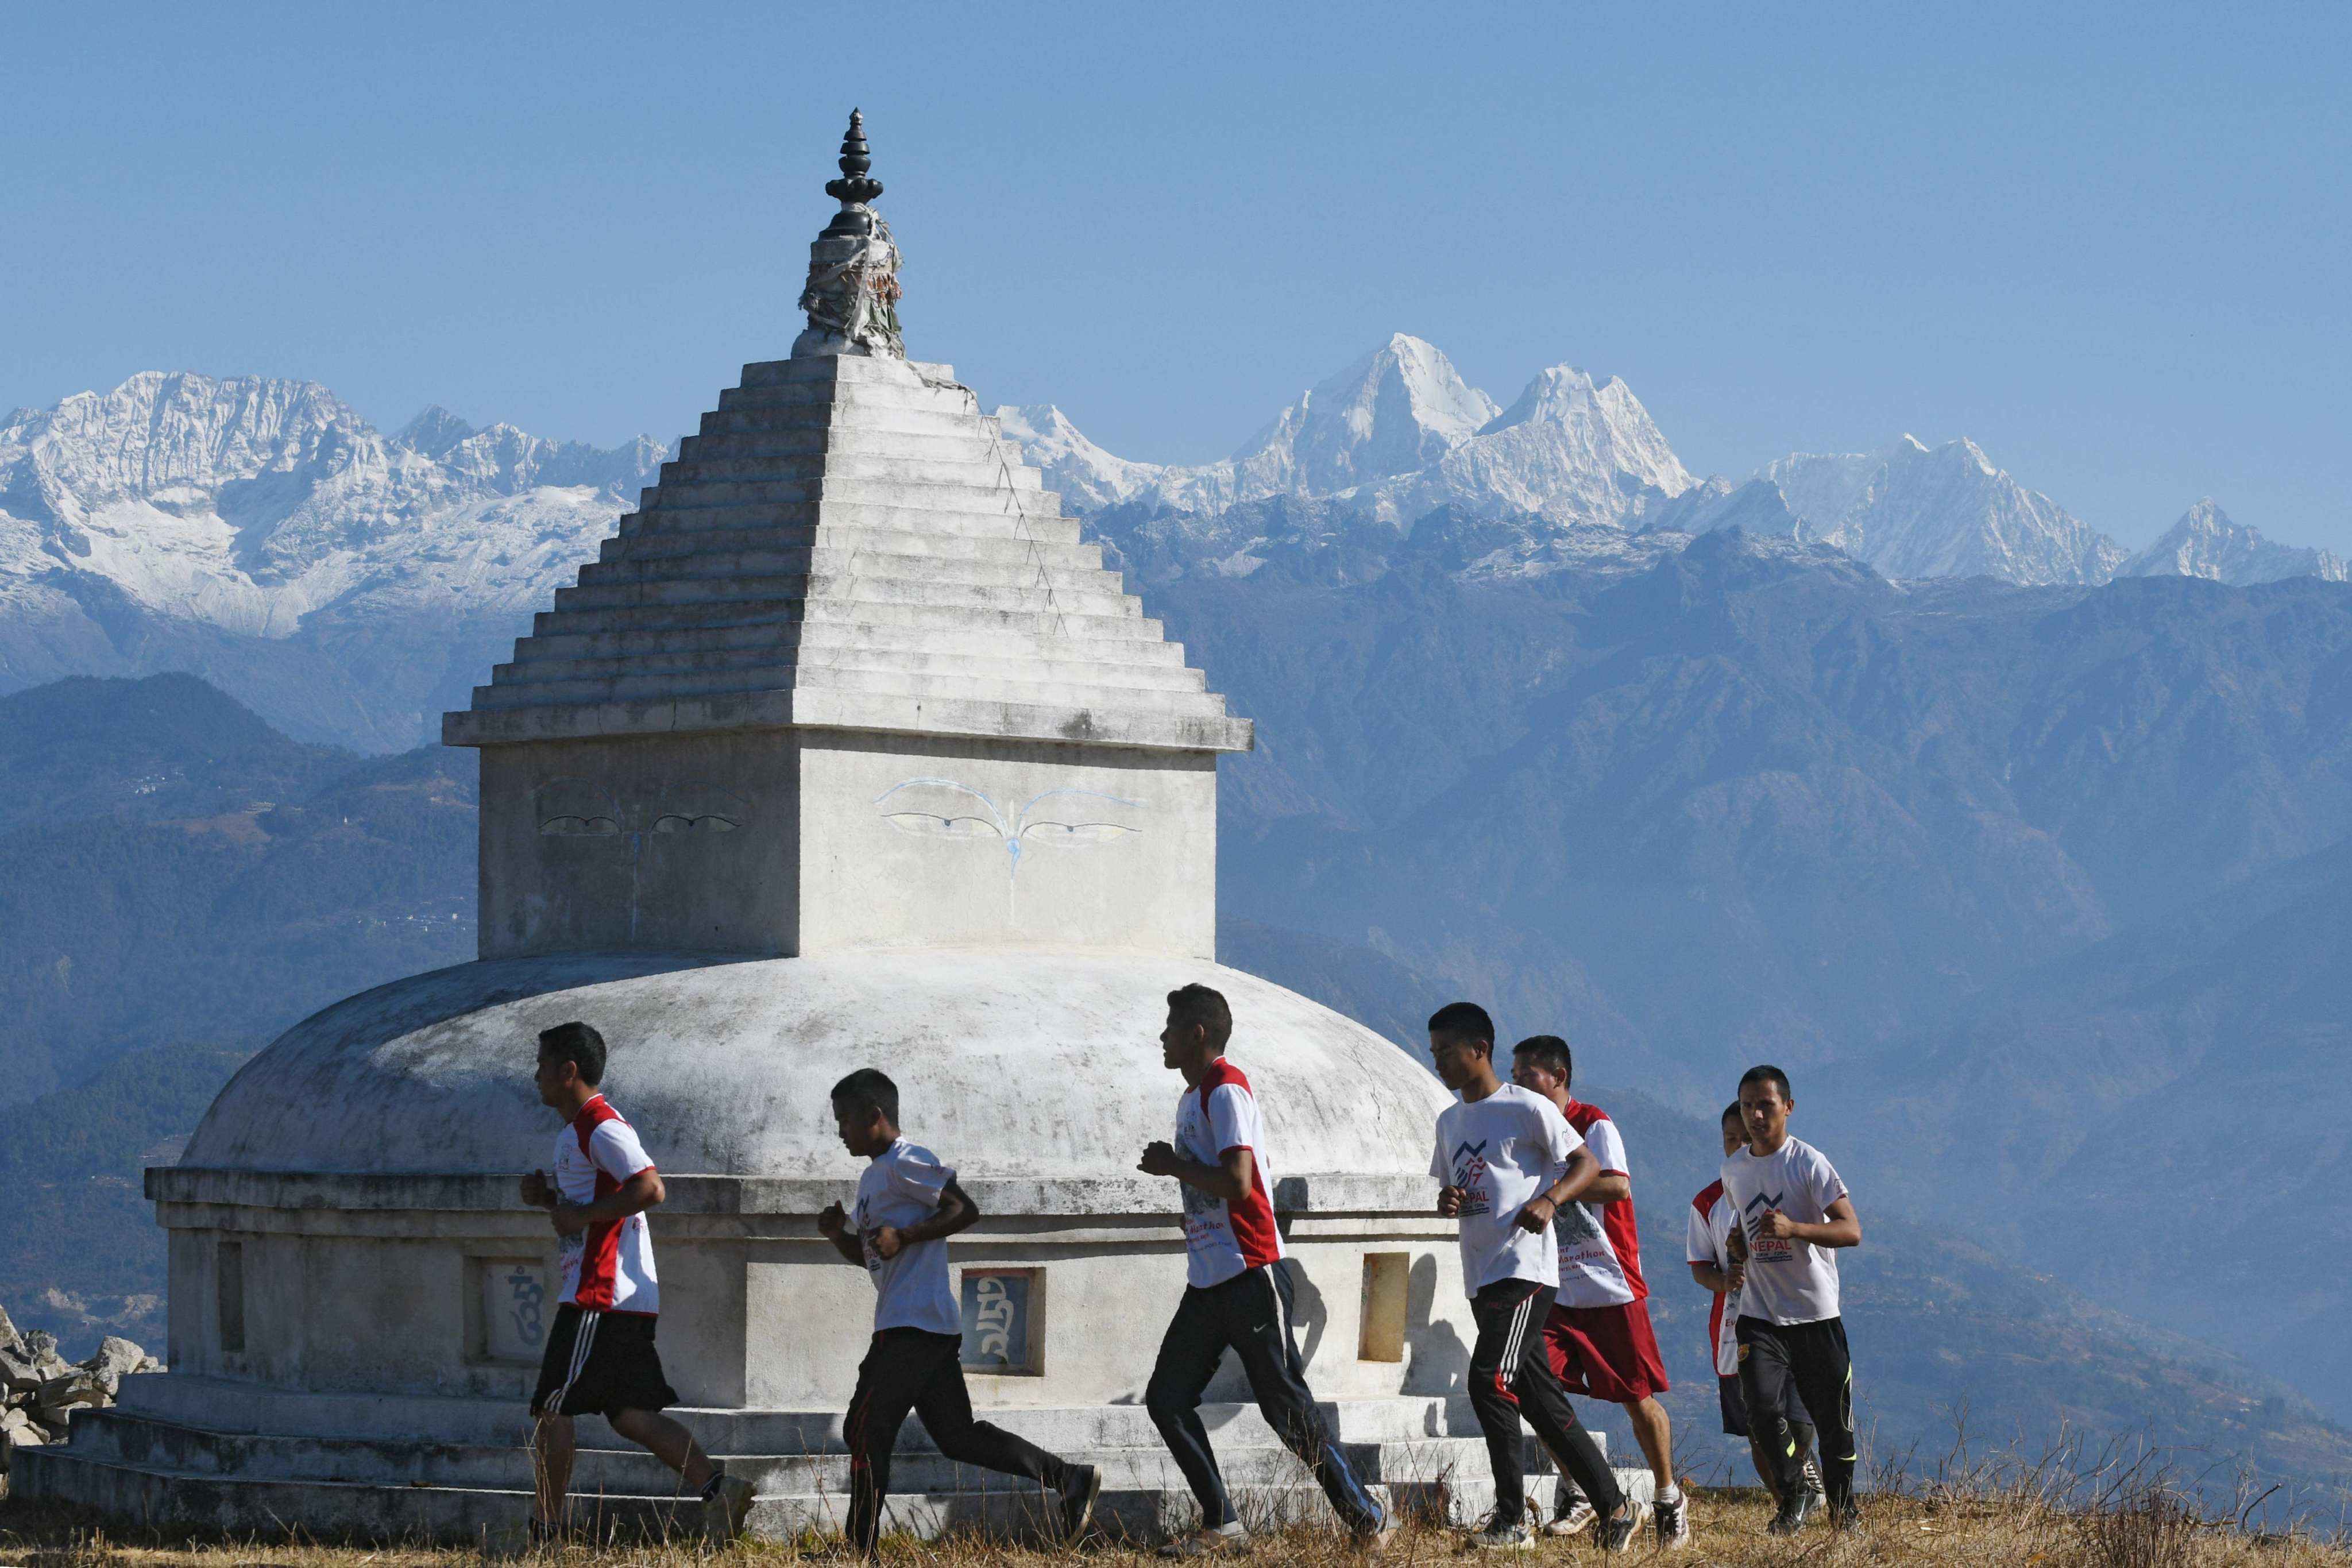 Buddhist monks exercise in Nepal. Nepal’s politics is witnessing the emergence of Hindu nationalism, with growing calls for the country to become a Hindu “rashtra”. Photo: AFP